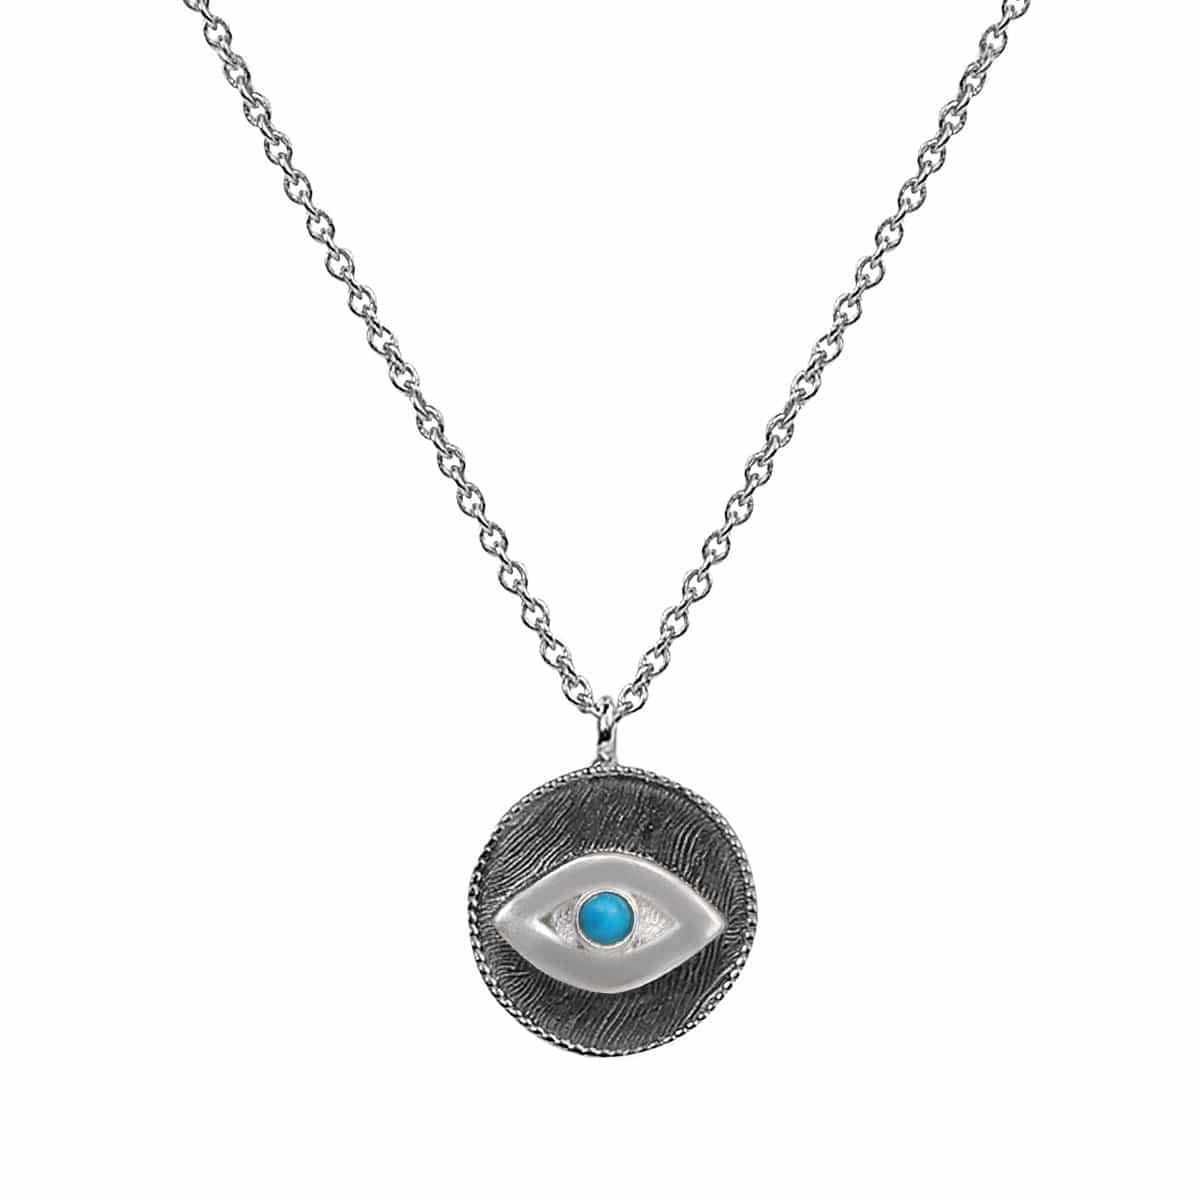 Karma and Luck  Necklace  -  Protective Shield - Turquoise Evil Eye Pendant Necklace